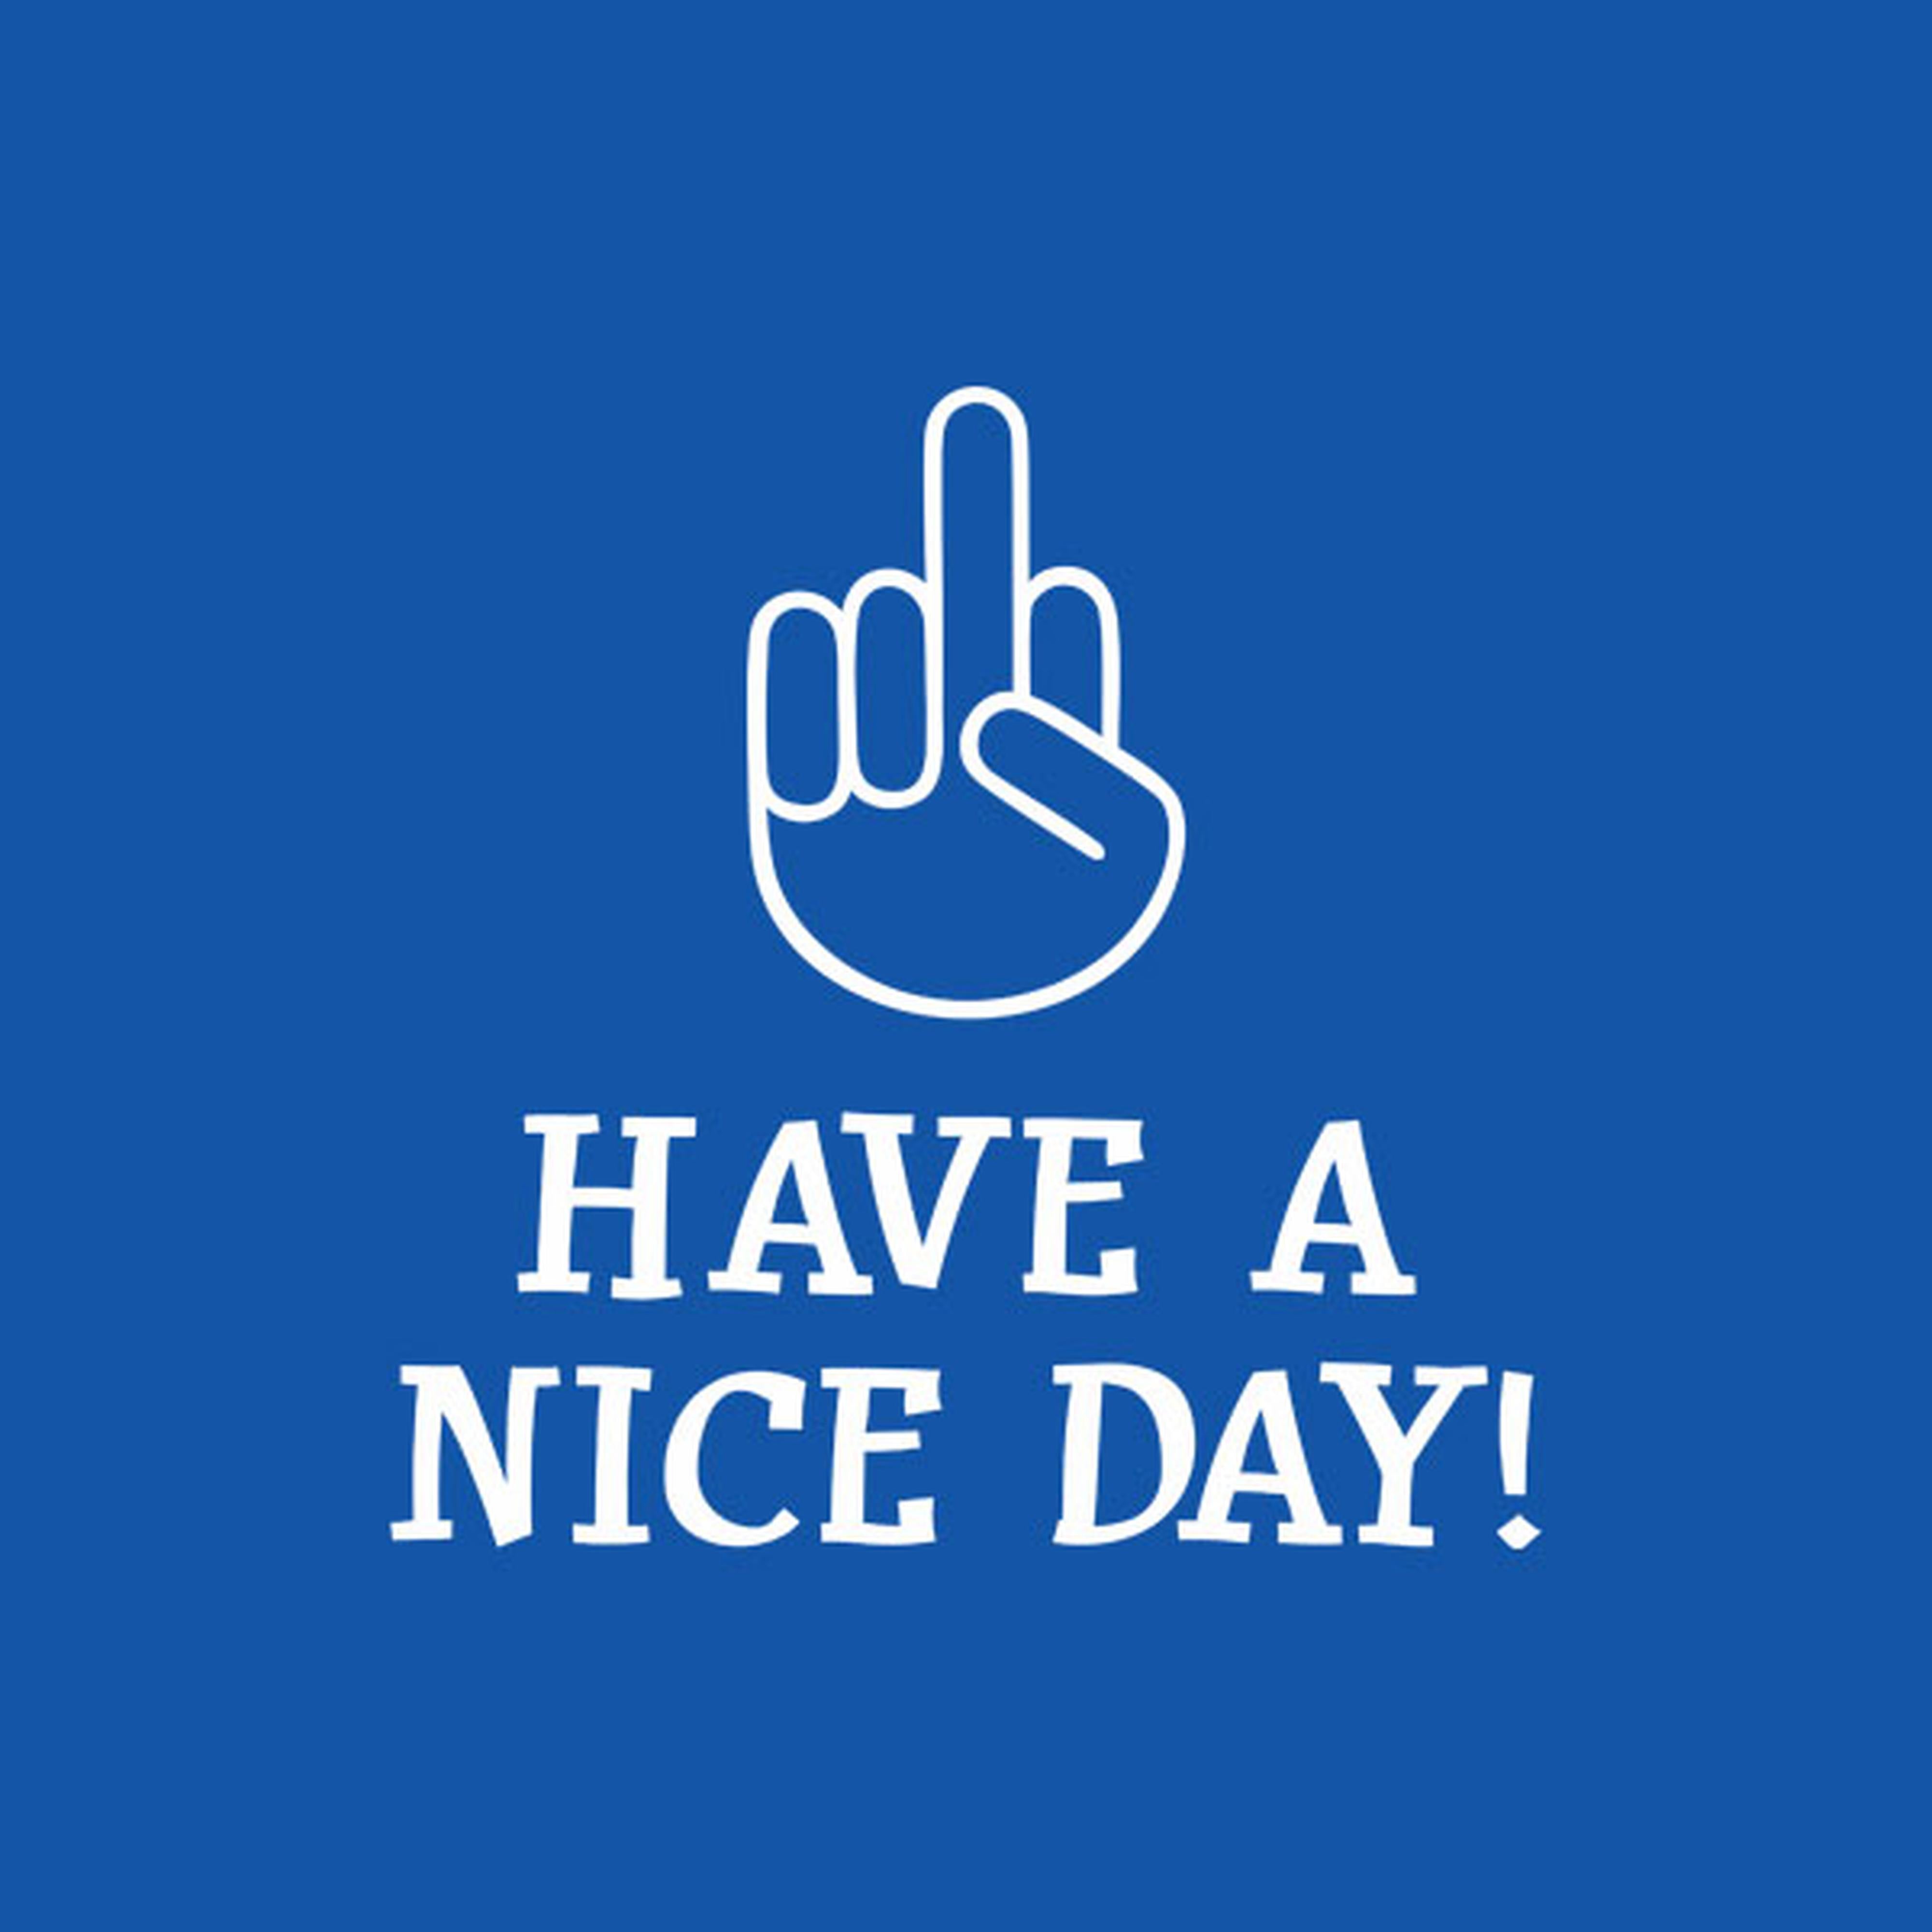 Have a nice day! - T-shirt